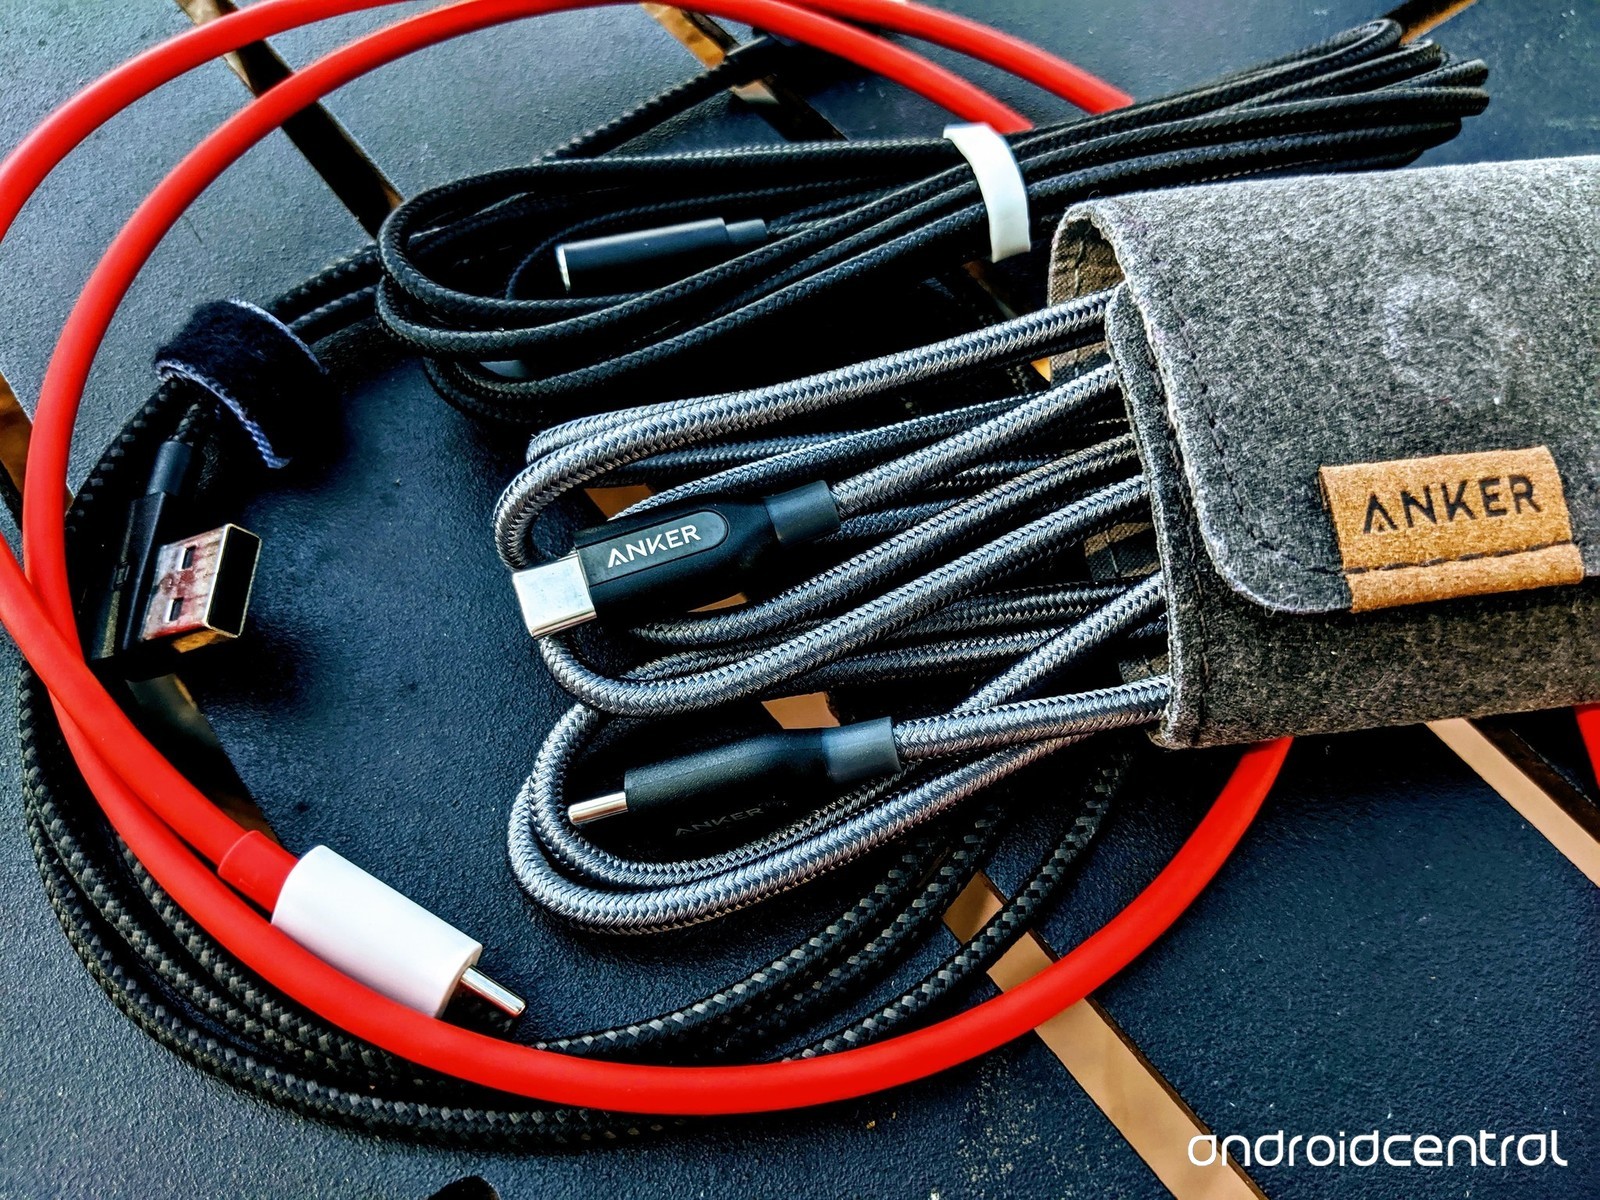 5 Things You Should Look For When Choosing Cables